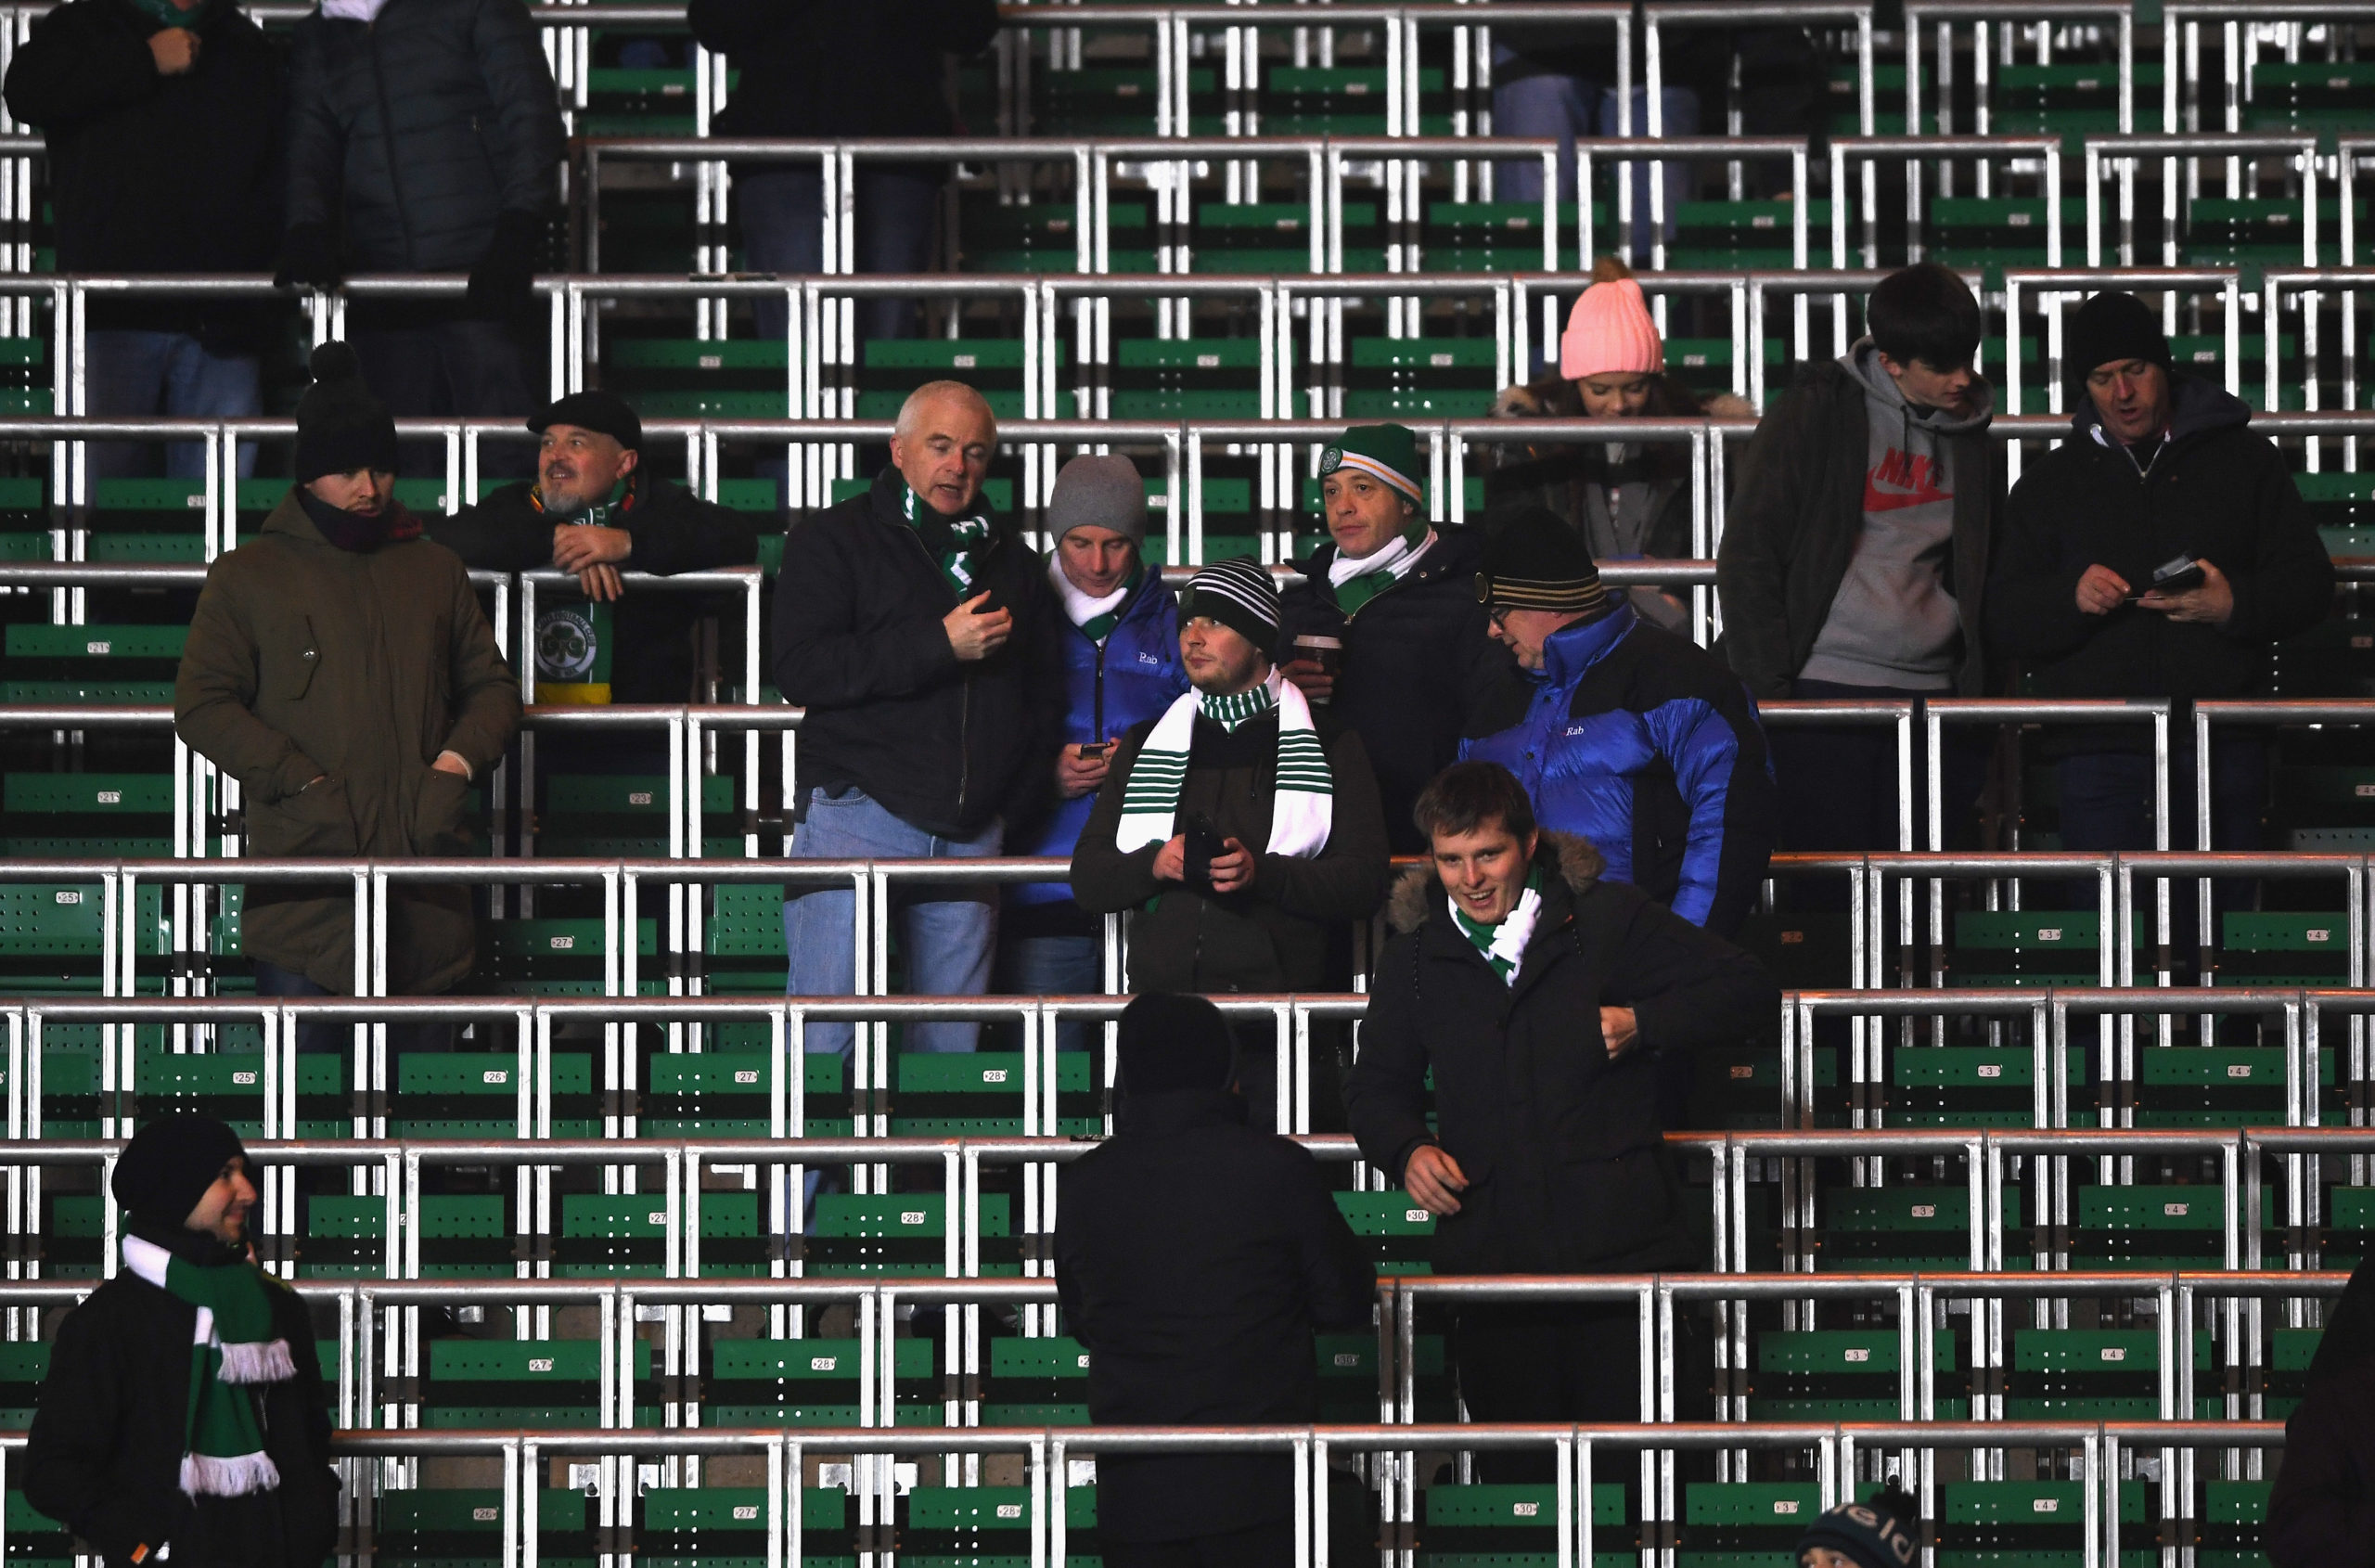 The rail seating at Celtic Park